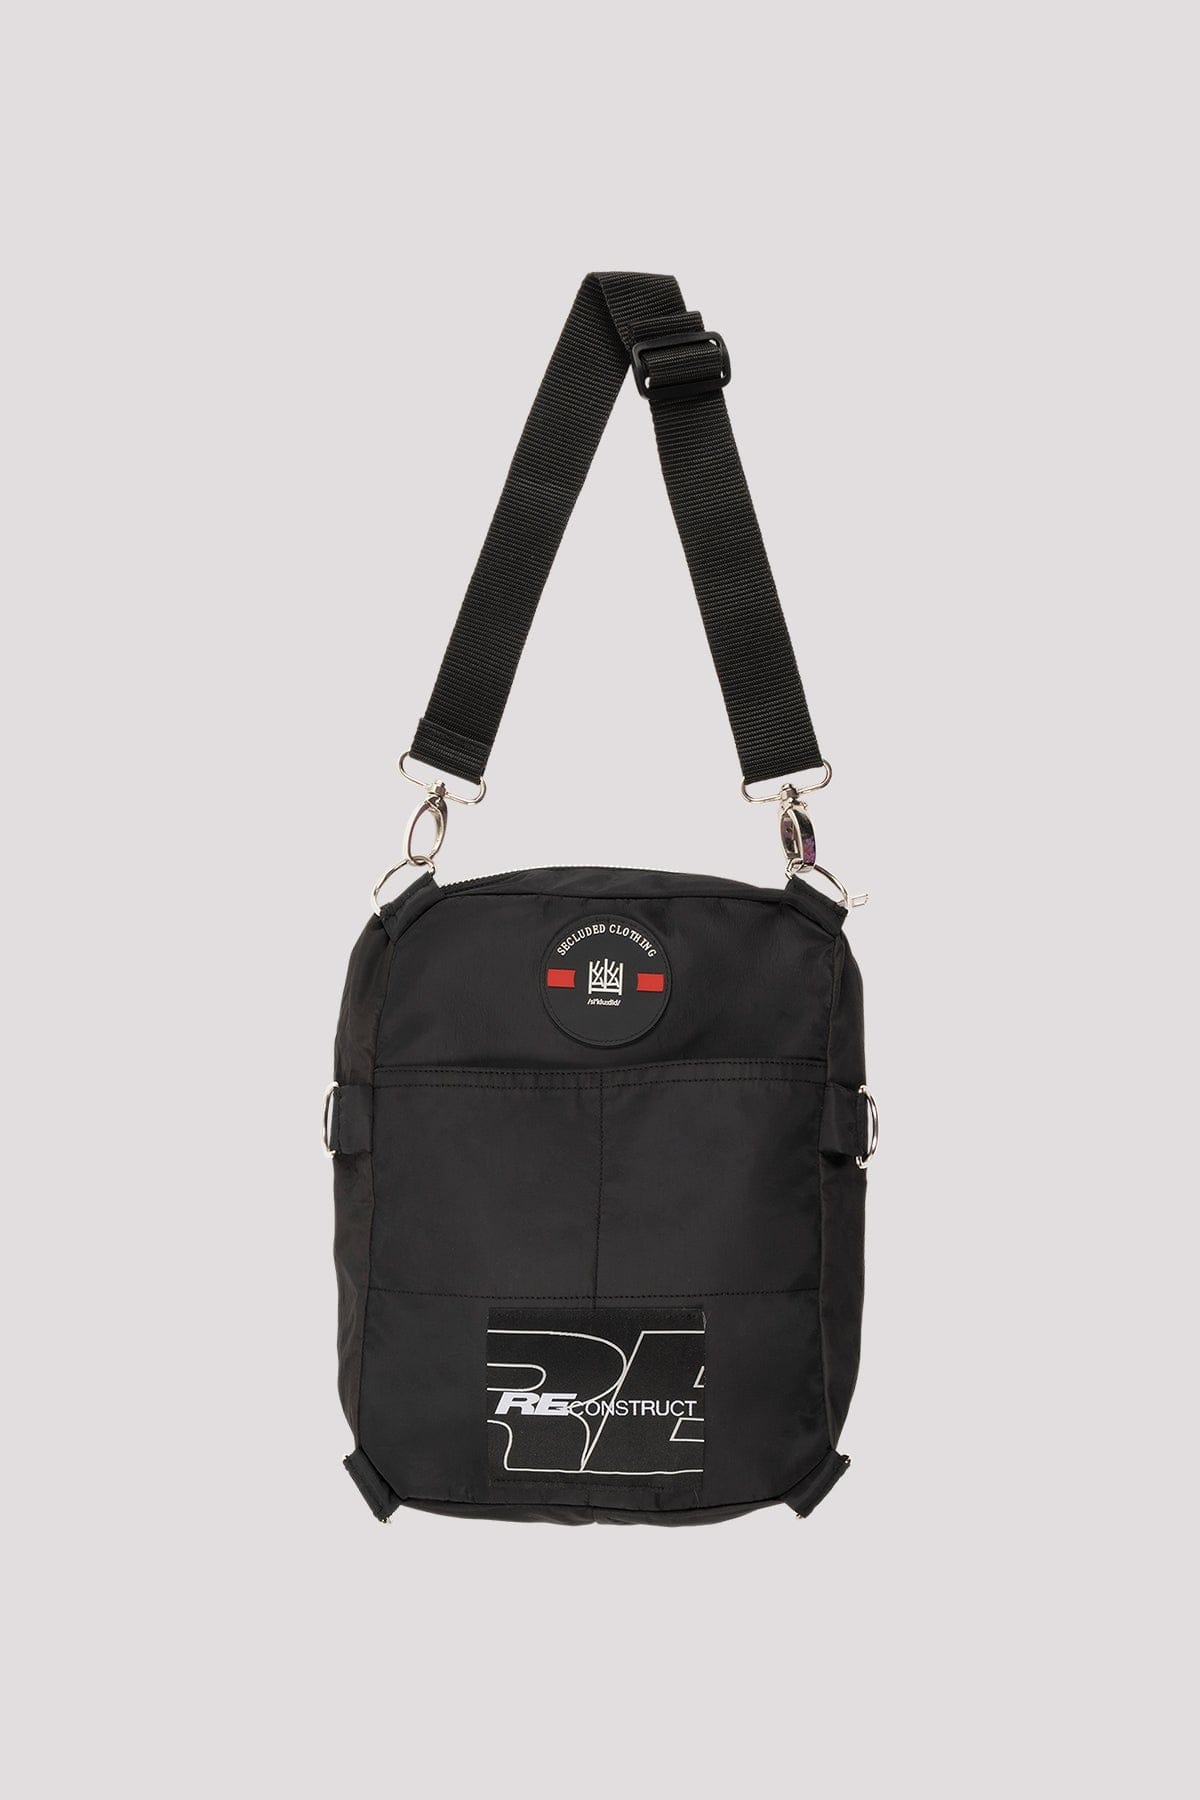 SECLUDED RECONSTRUCT BACK NYLON BAG